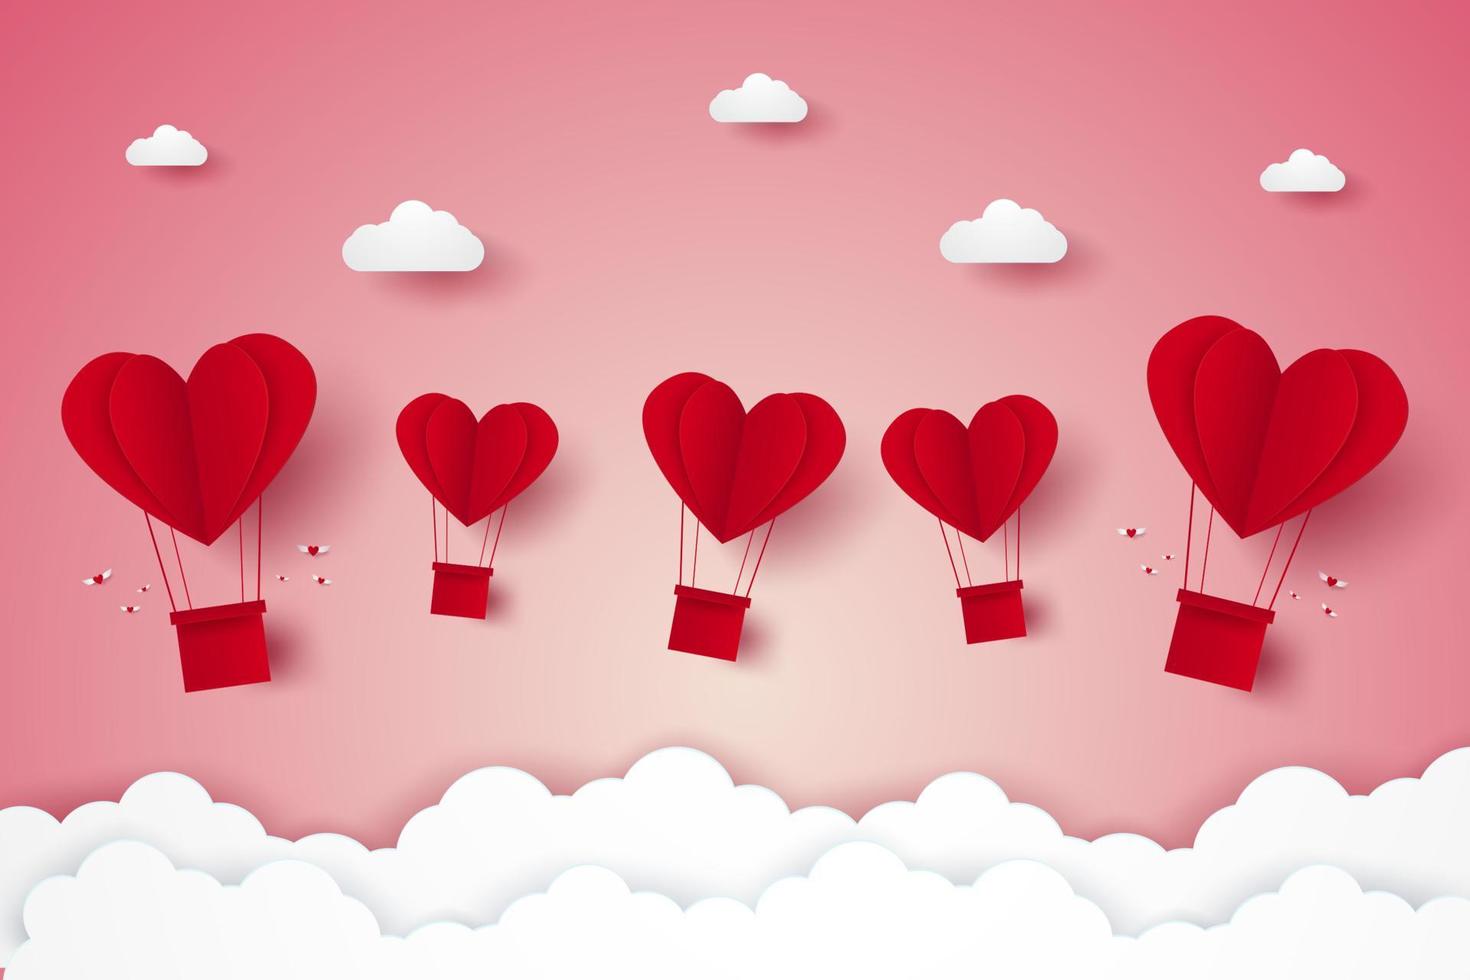 Valentines day, red heart hot air balloons flying, paper art style vector